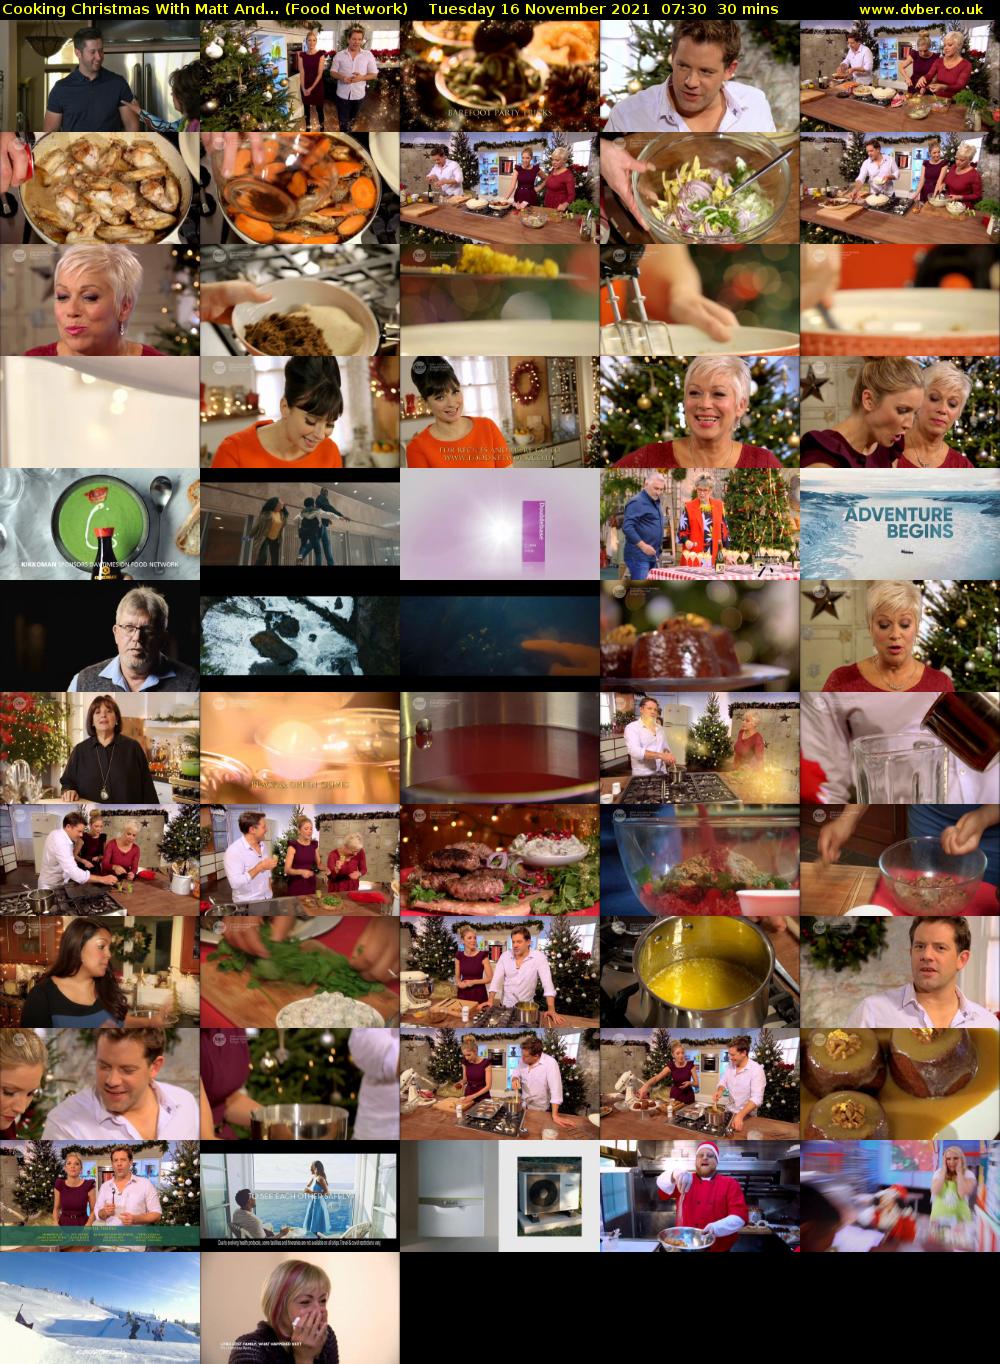 Cooking Christmas With Matt And... (Food Network) Tuesday 16 November 2021 07:30 - 08:00